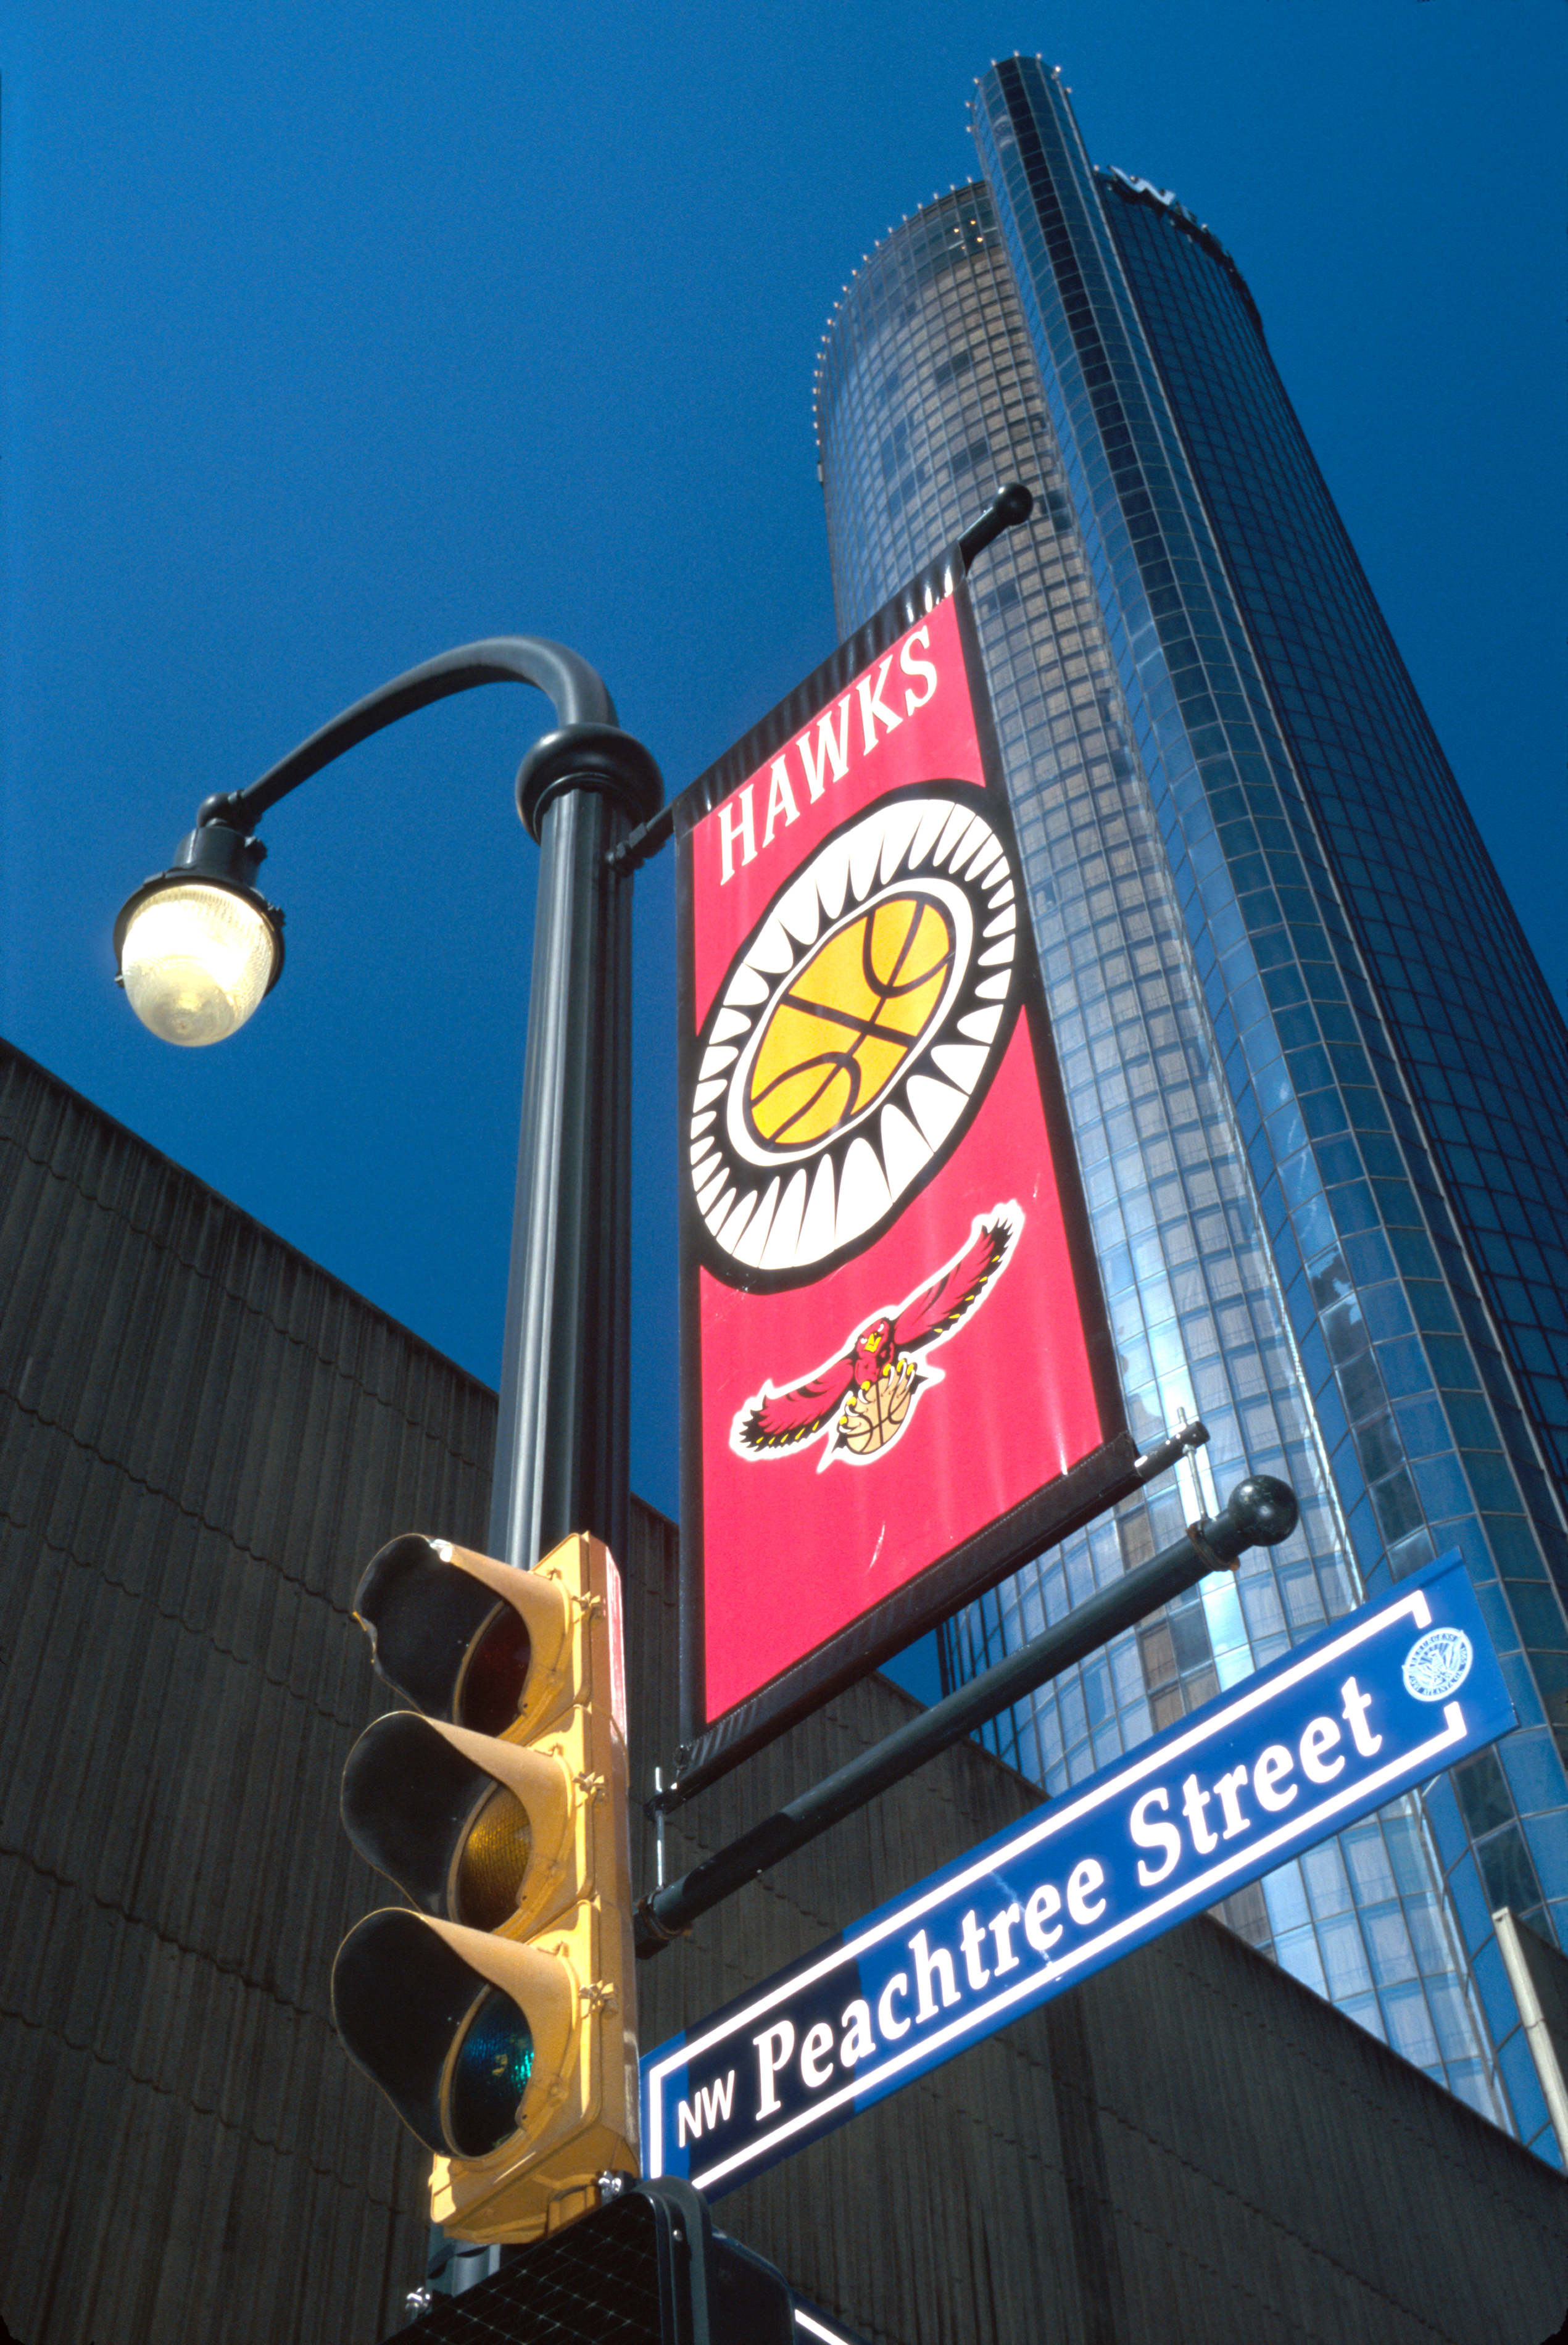 Peachtree Street sign and banner for Hawks National Basketball Association team.